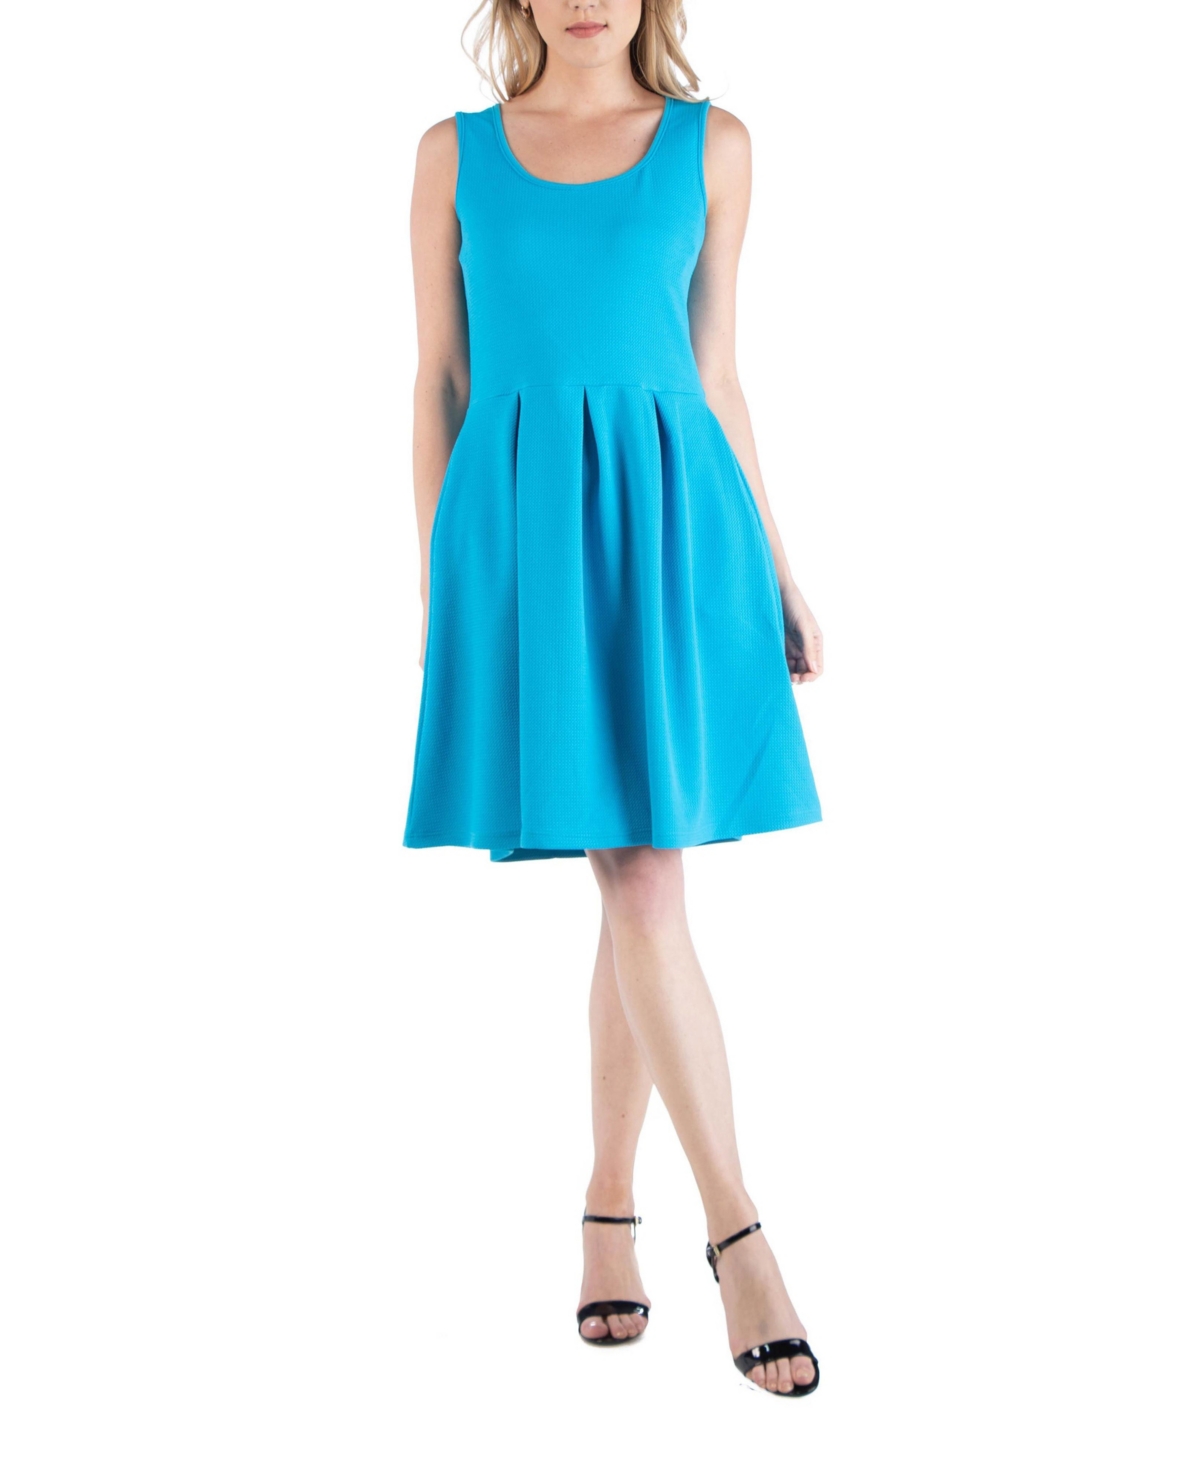 Sleeveless Skater Pleated Mini Dress with Pockets - Turquoise